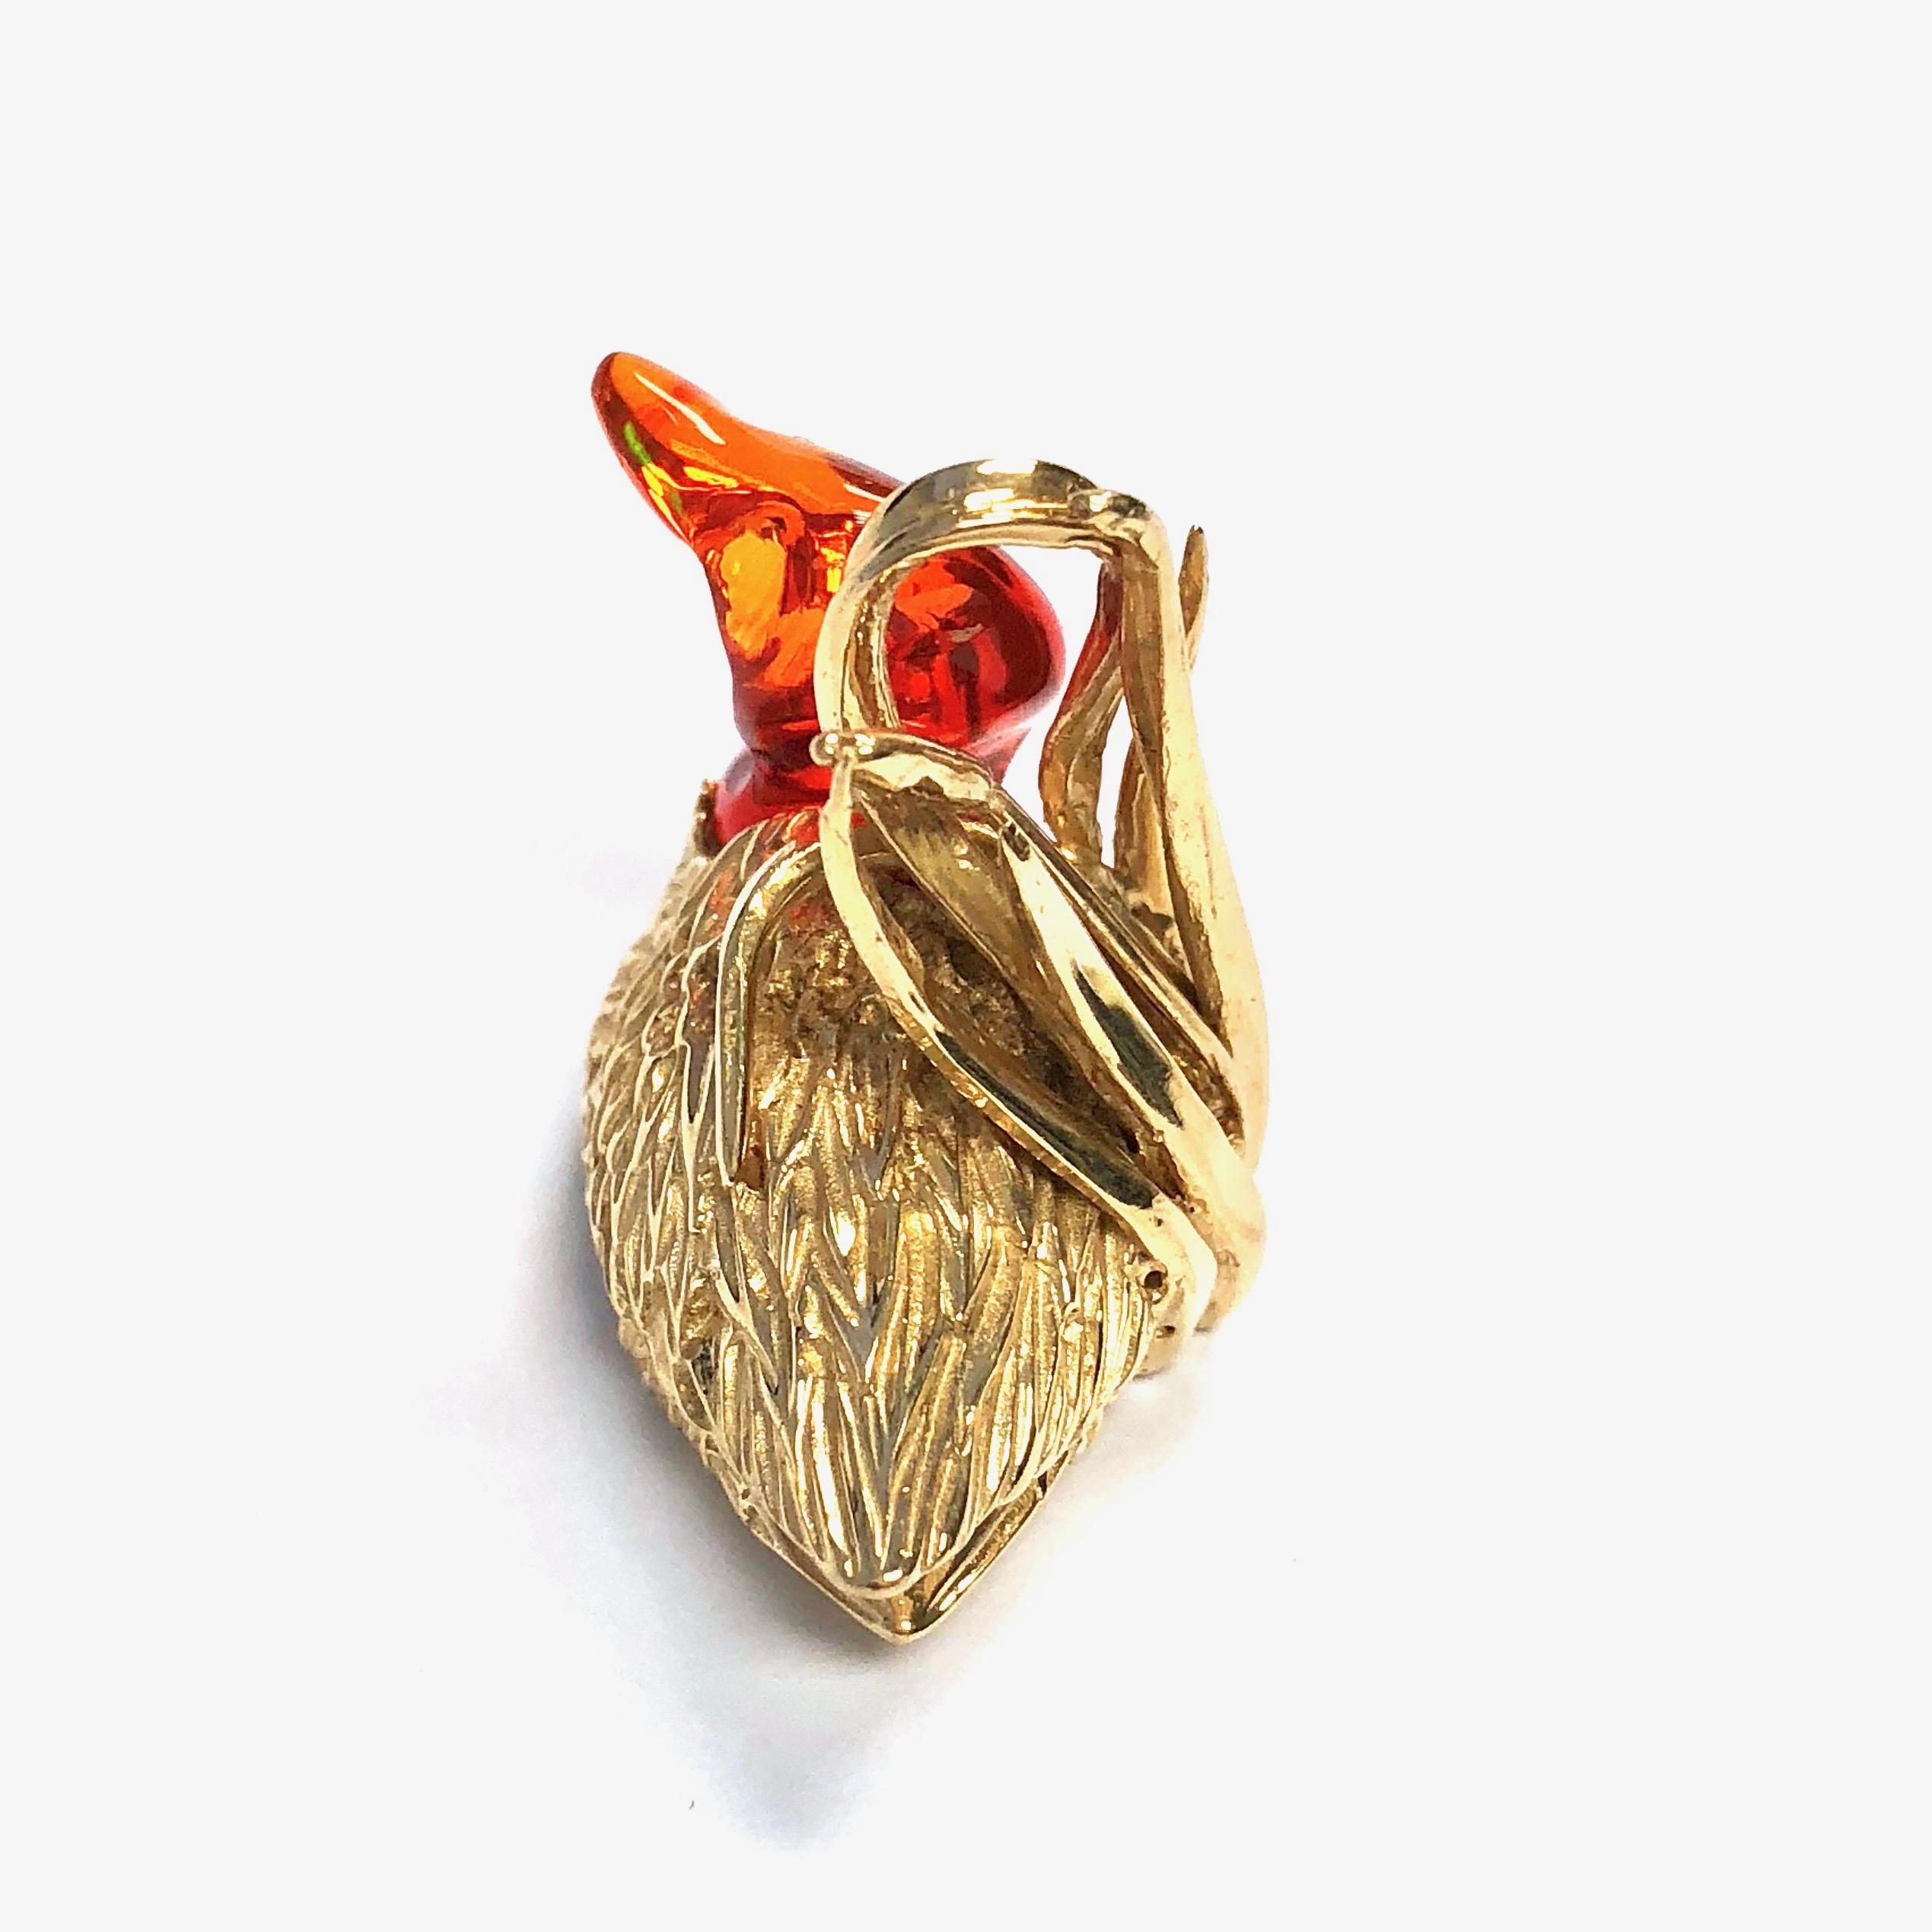 This one-of-a-kind bird pendant is crafted in 14K yellow gold, featuring a free-form fire opal as the duck's head and neck, supported by the textured gold body and reed as the loop in the back. The opal displays a strong fire of colors. Truly a